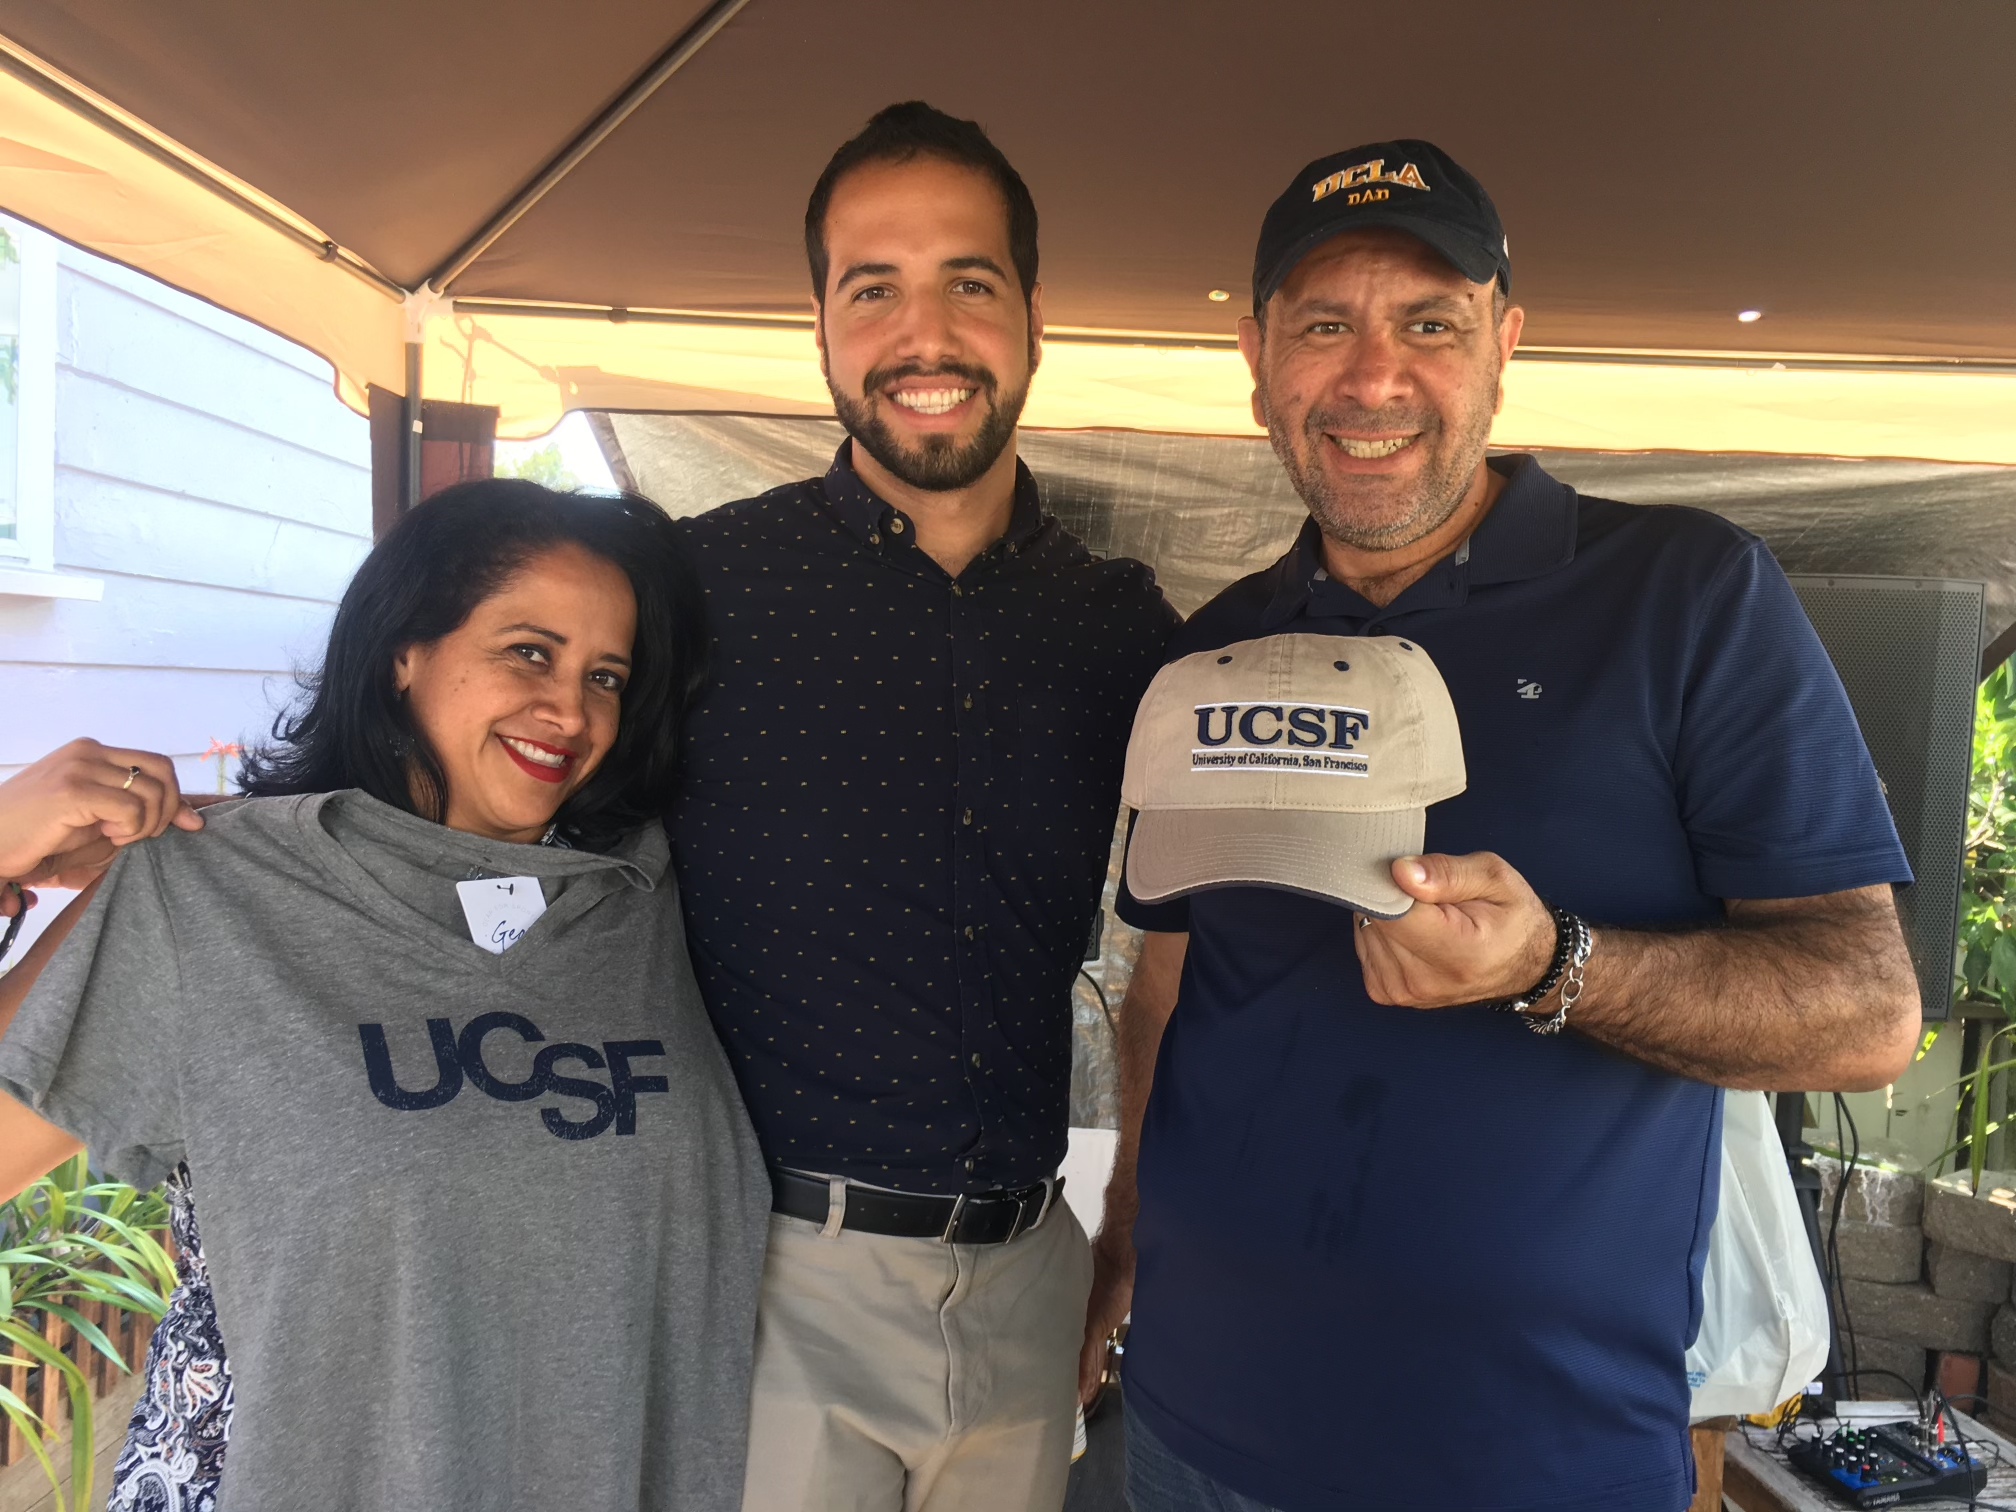 Photograph of Ernesto Rojas with family holding UCSF T-shirt and baseball hat